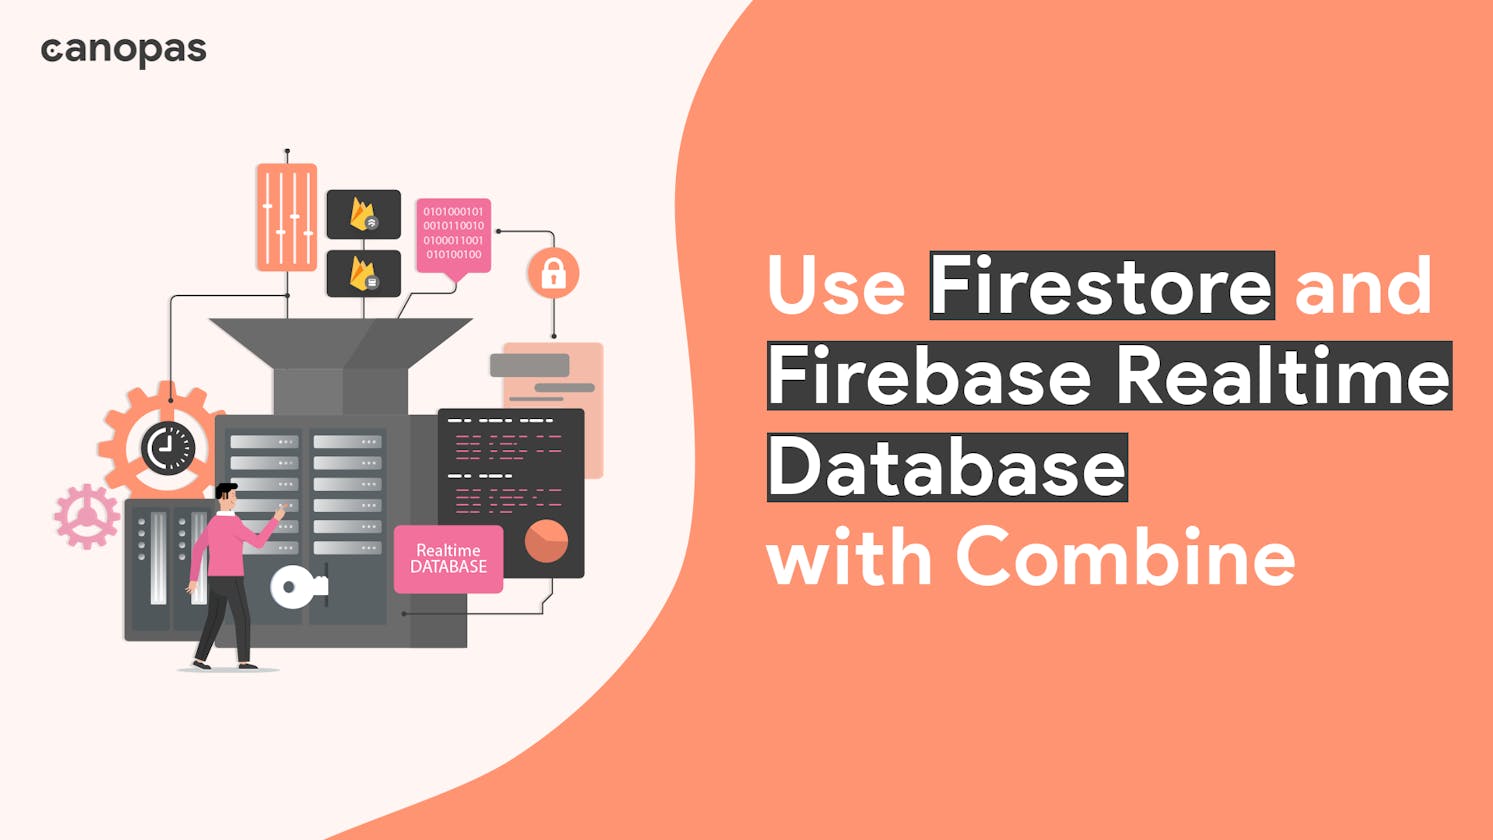 How to use Firestore and Firebase Realtime Database with Combine in iOS